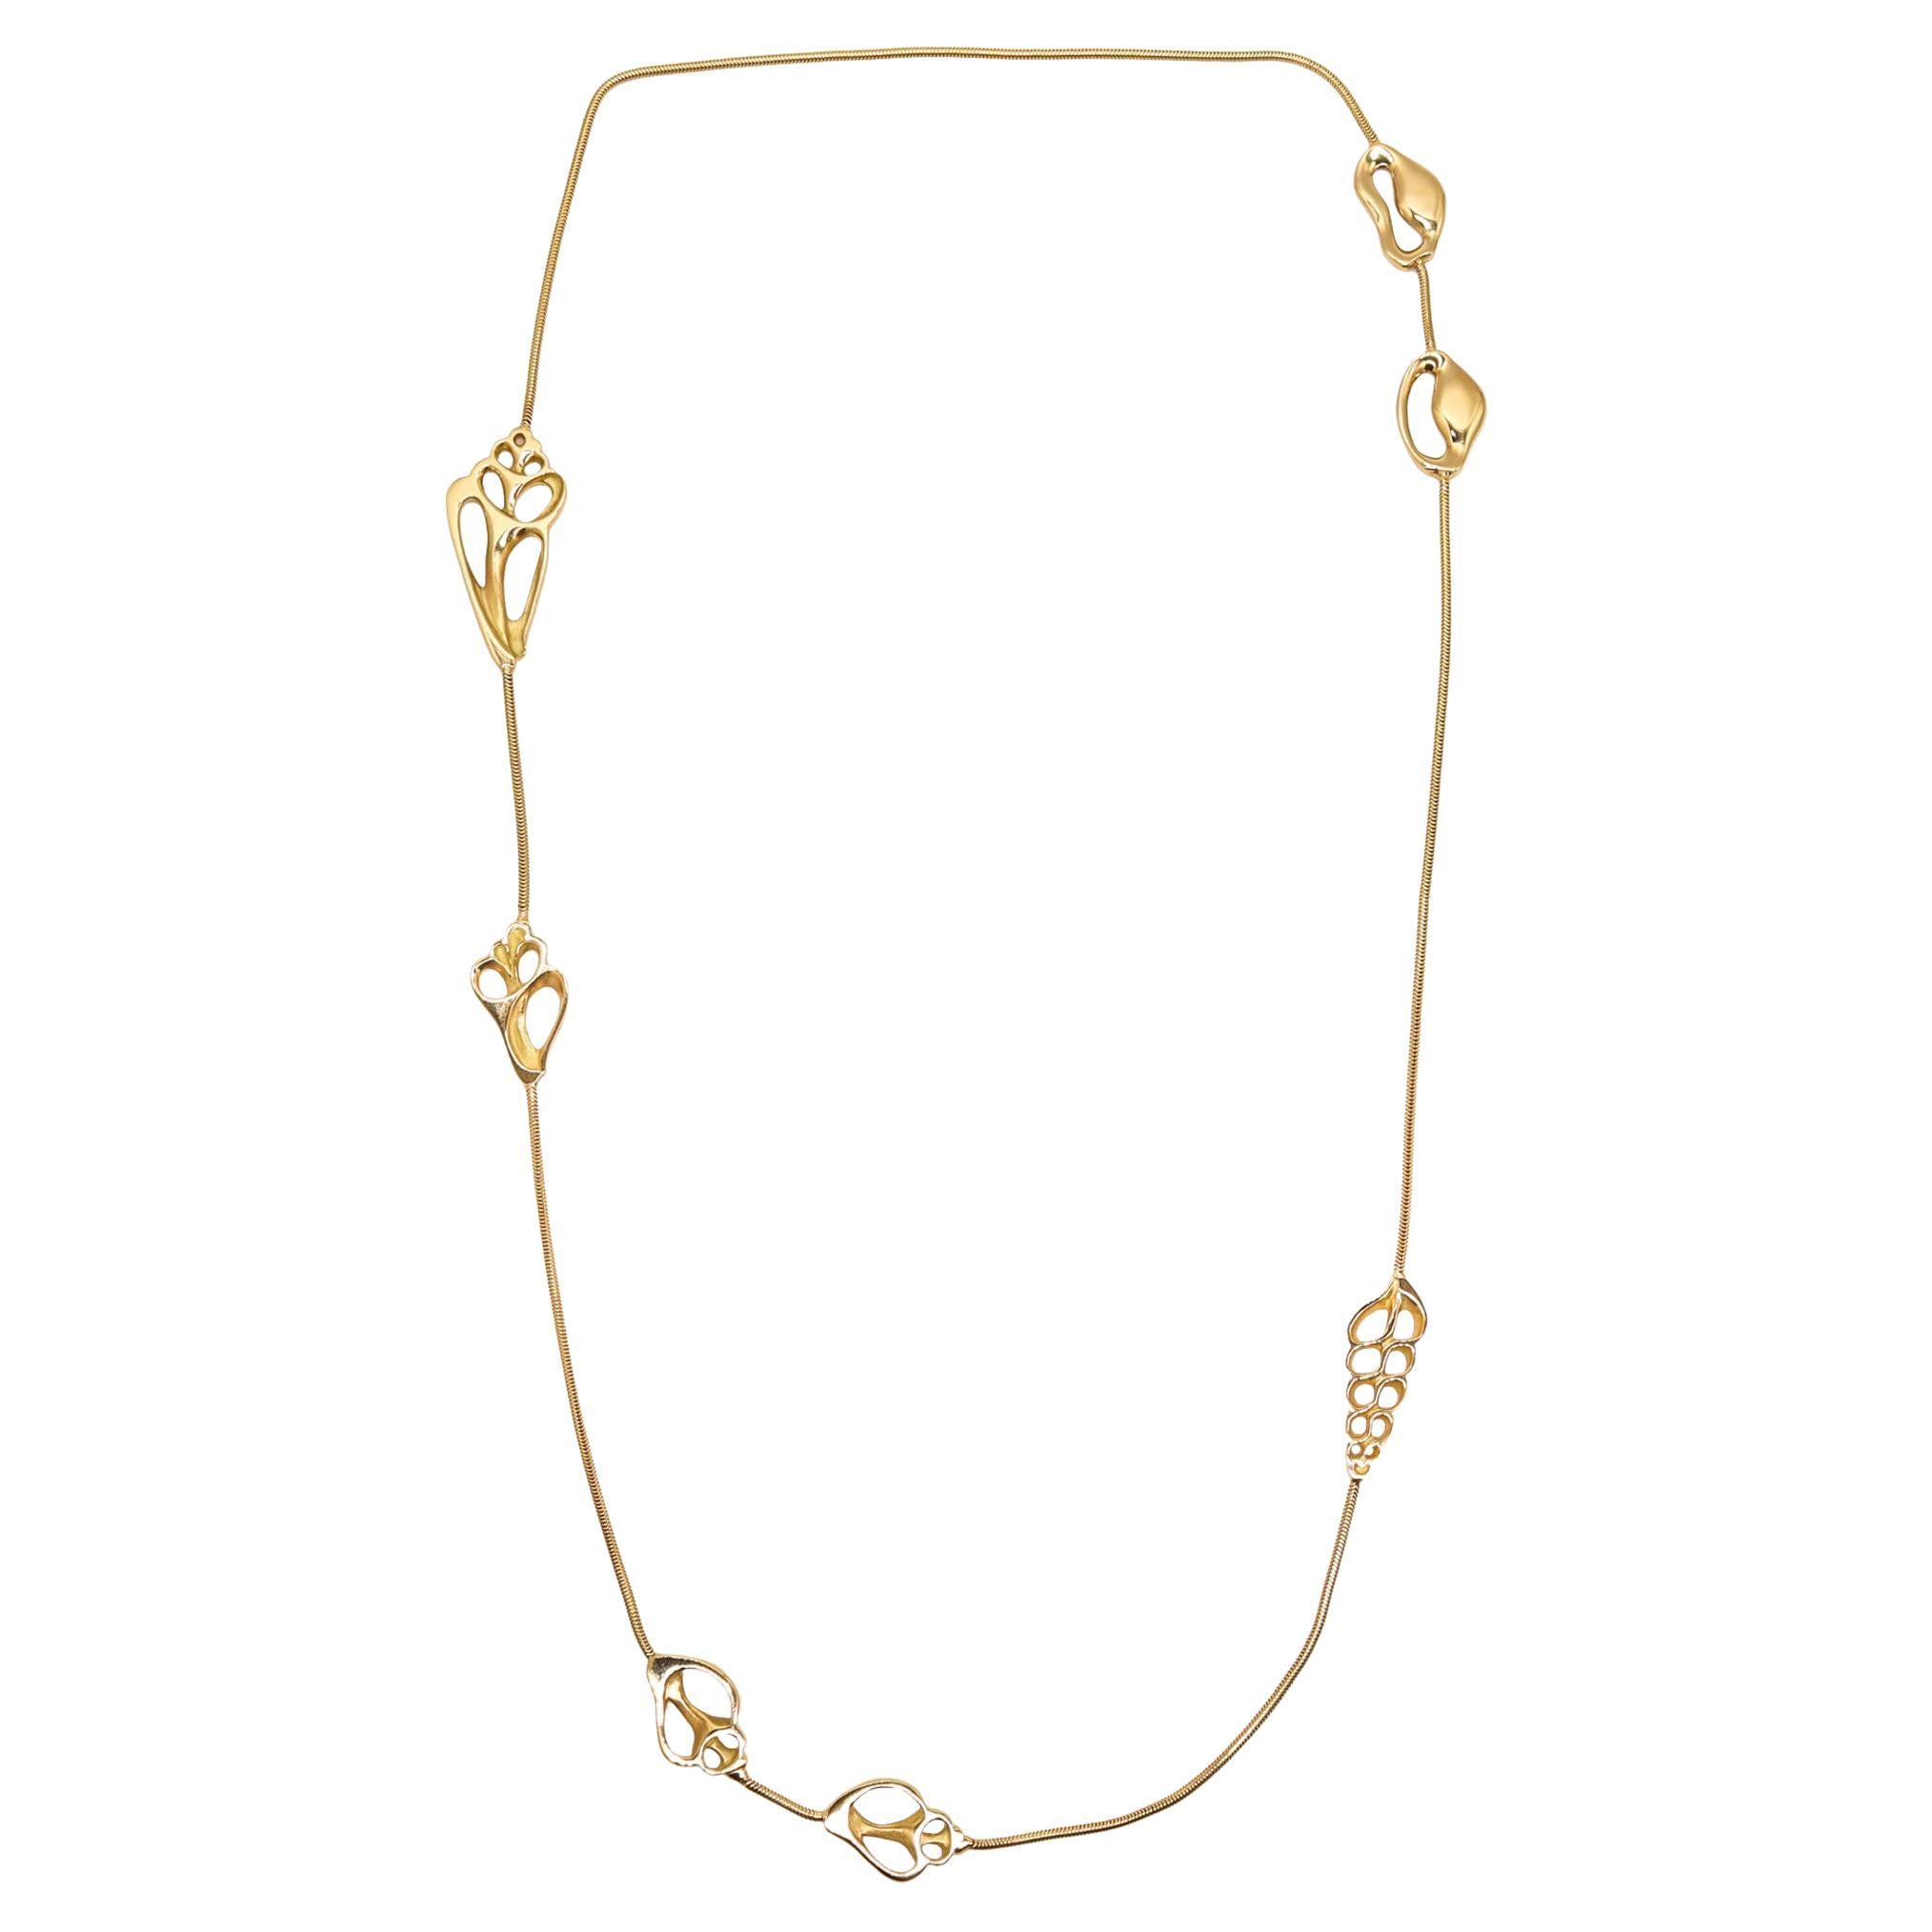 Tiffany & Co. 1979 by Angela Cummings Long Necklace Sautoir in 18kt Yellow Gold